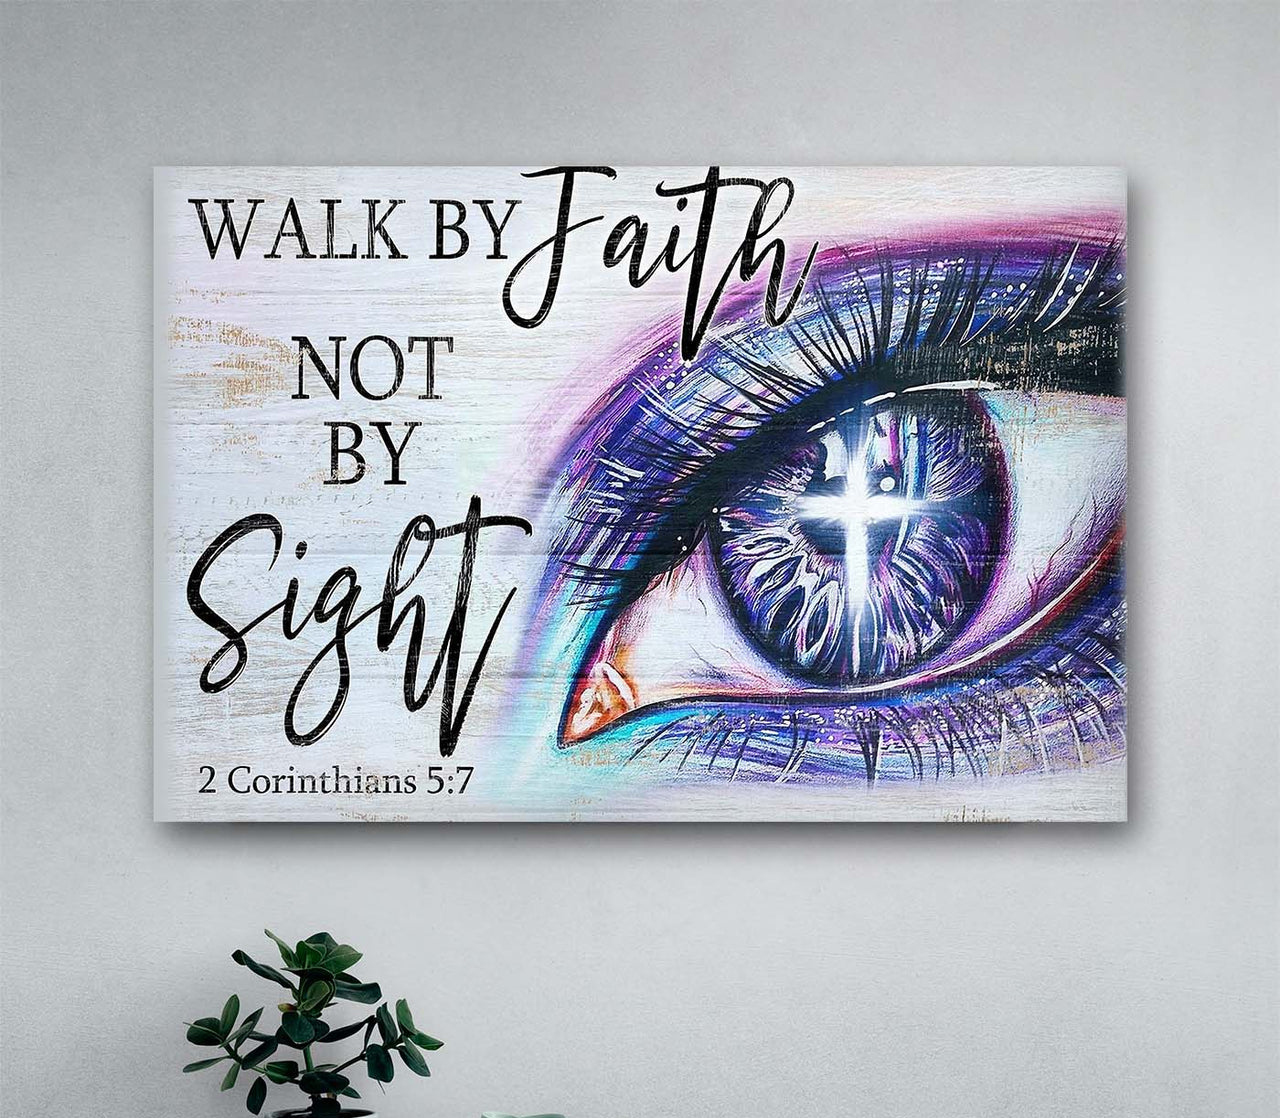 Christian Gorgeous Eyes Walk By Faith Not By Sight Jesus Wall Art Decor Poster Canvas